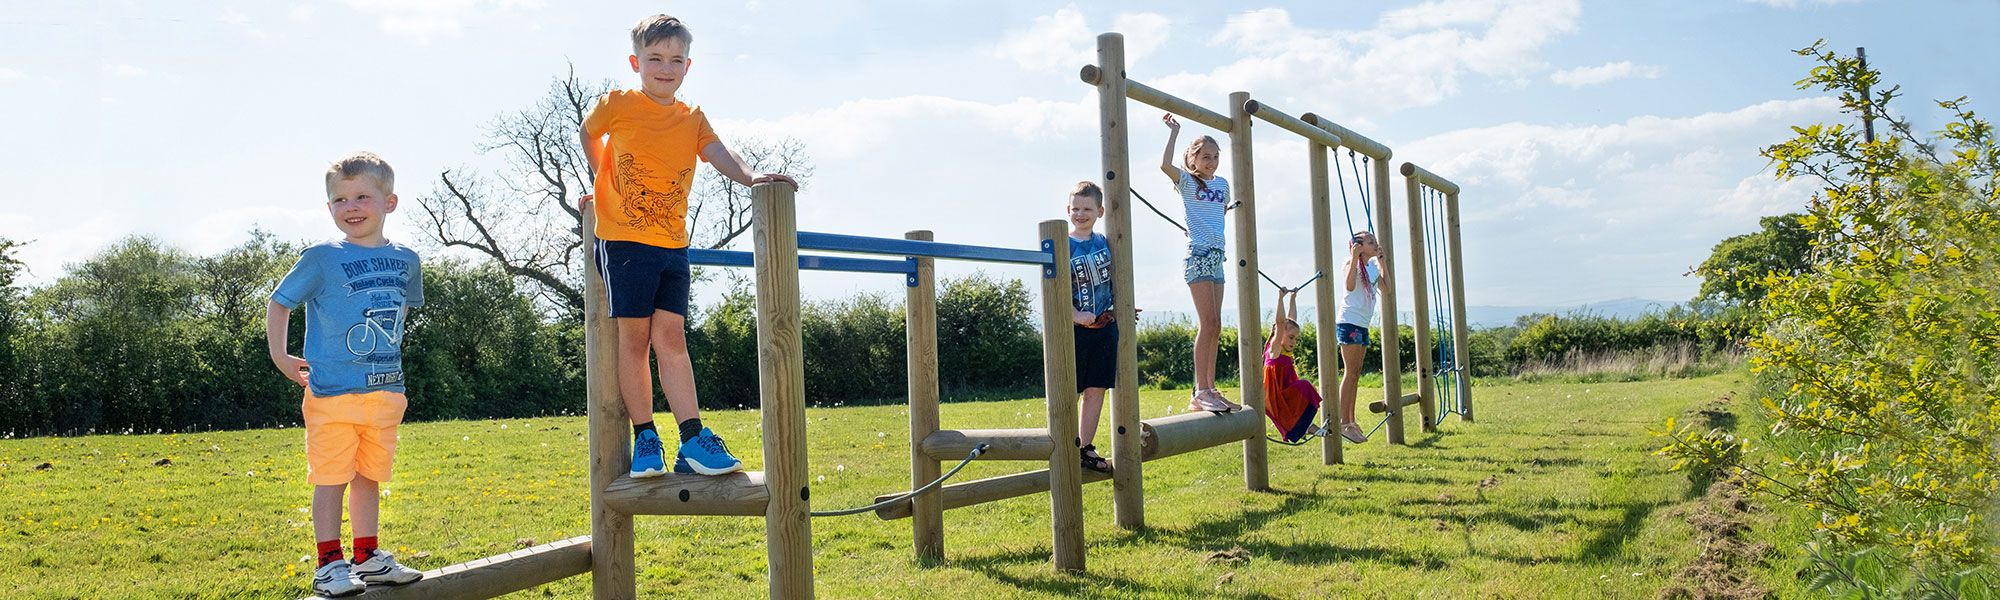 Children on climbing frame at outdoor park in North Wales